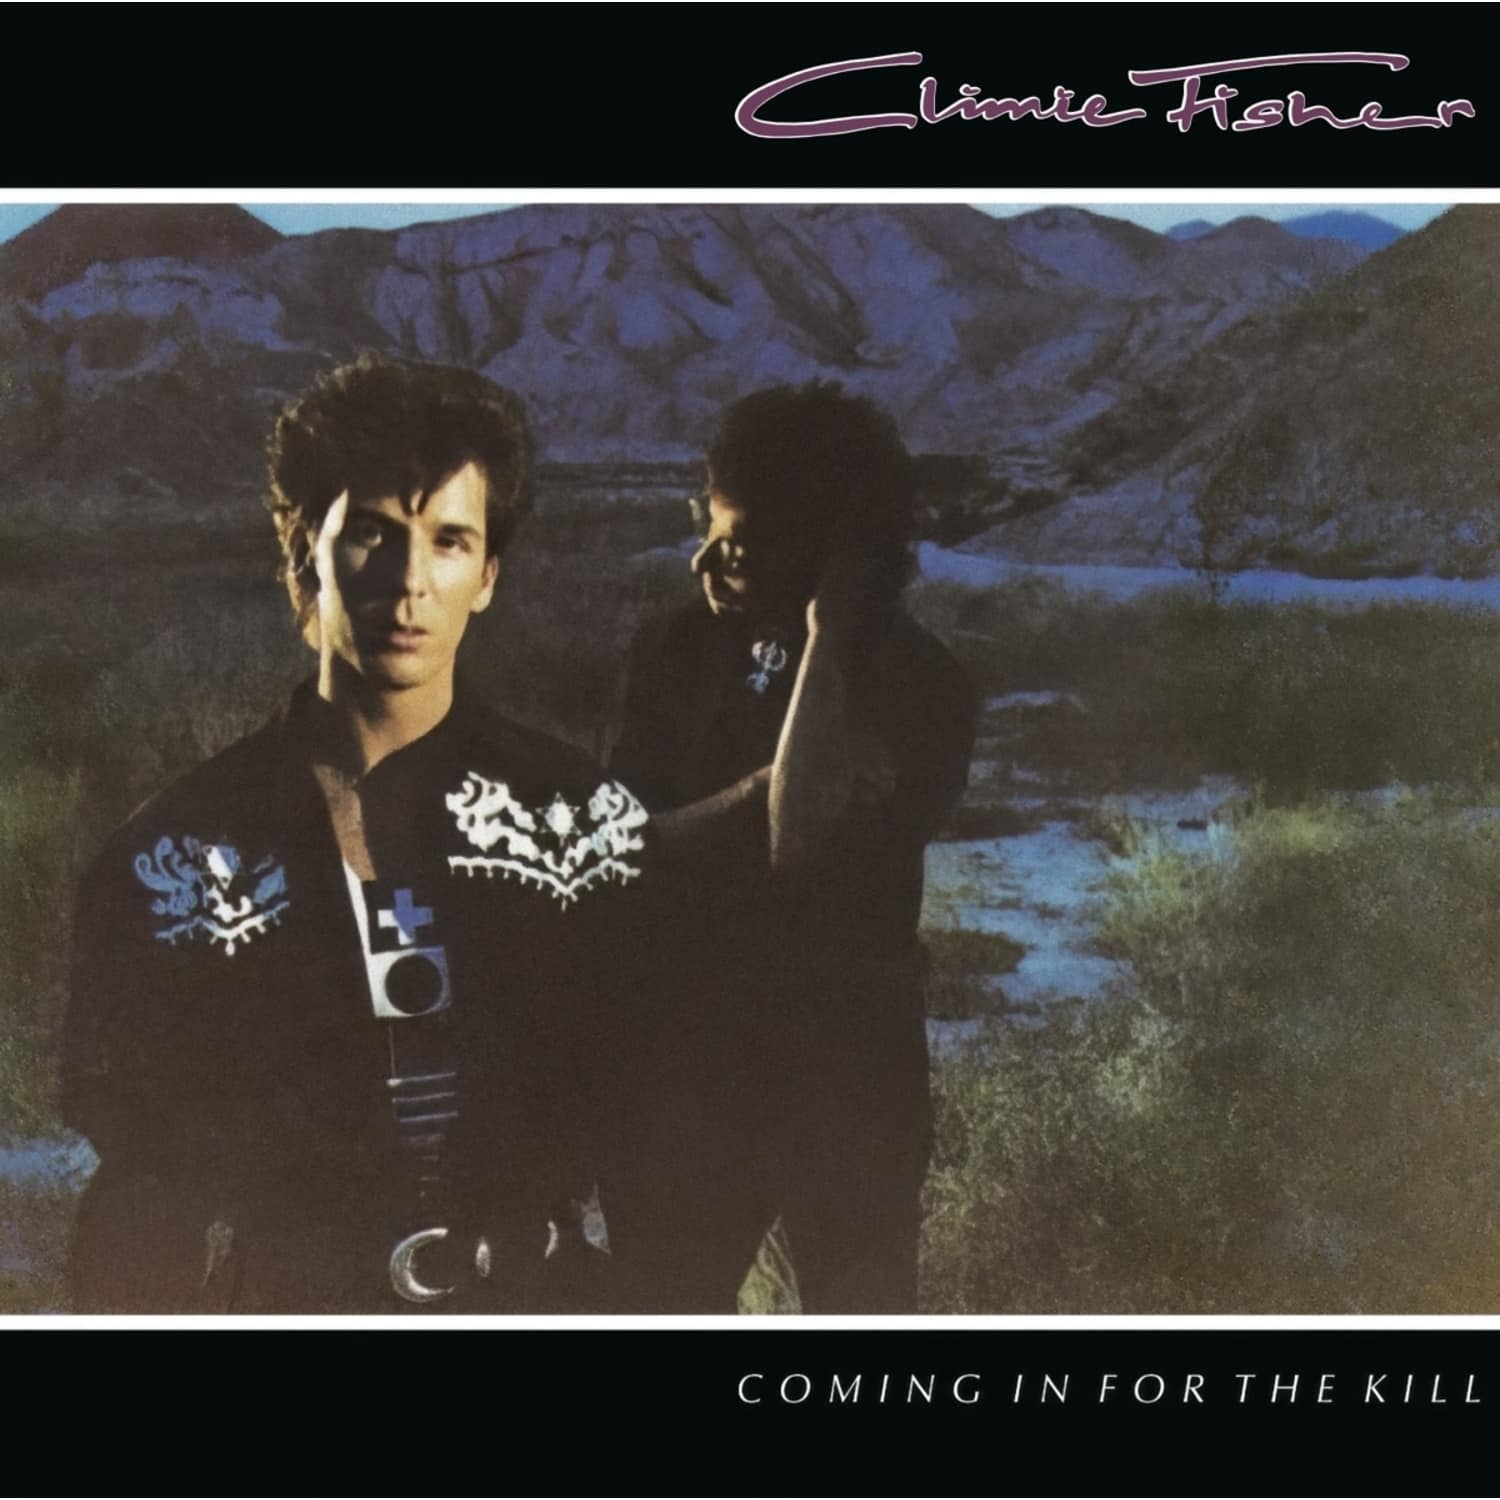 Climie Fisher - COMING IN FOR THE KILL 